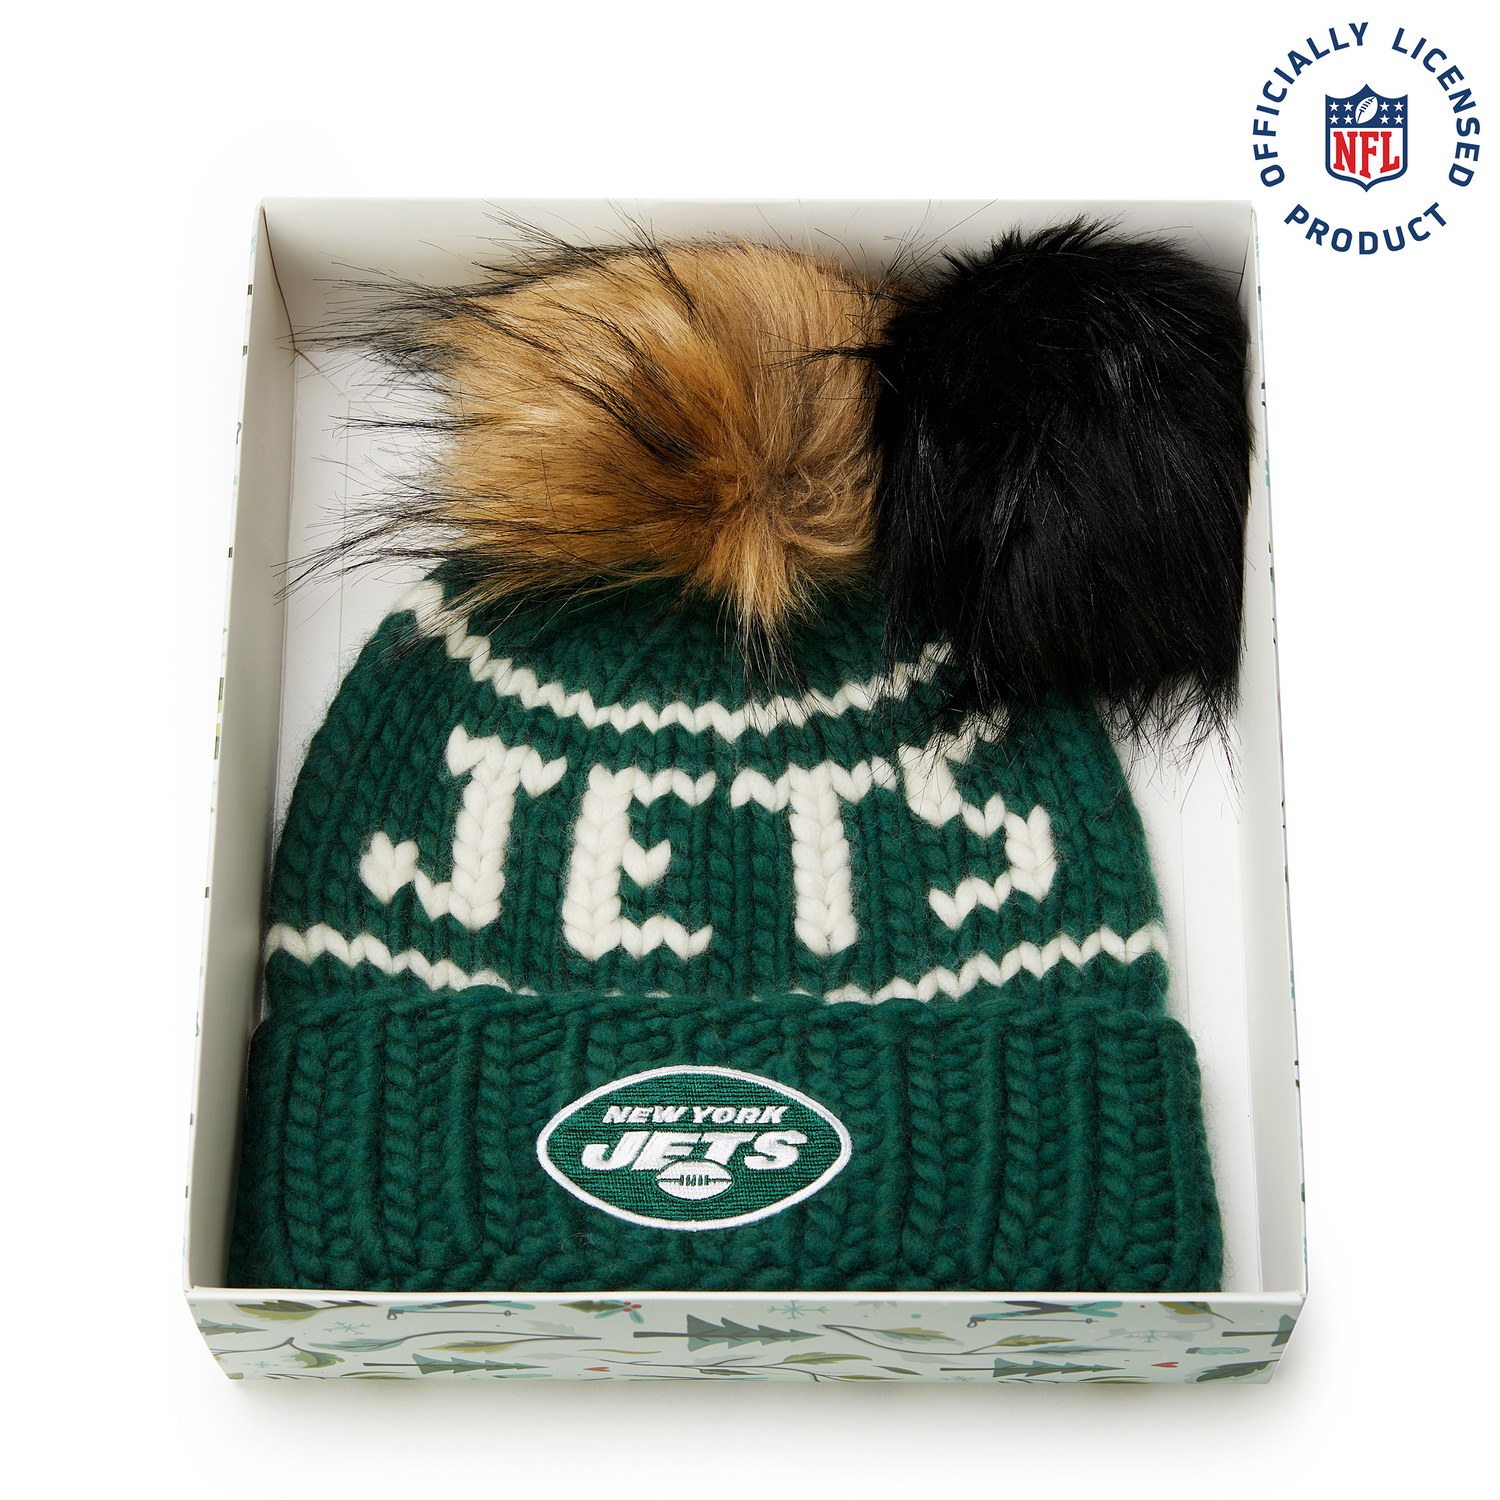 The Jets NFL Beanie Gift Set